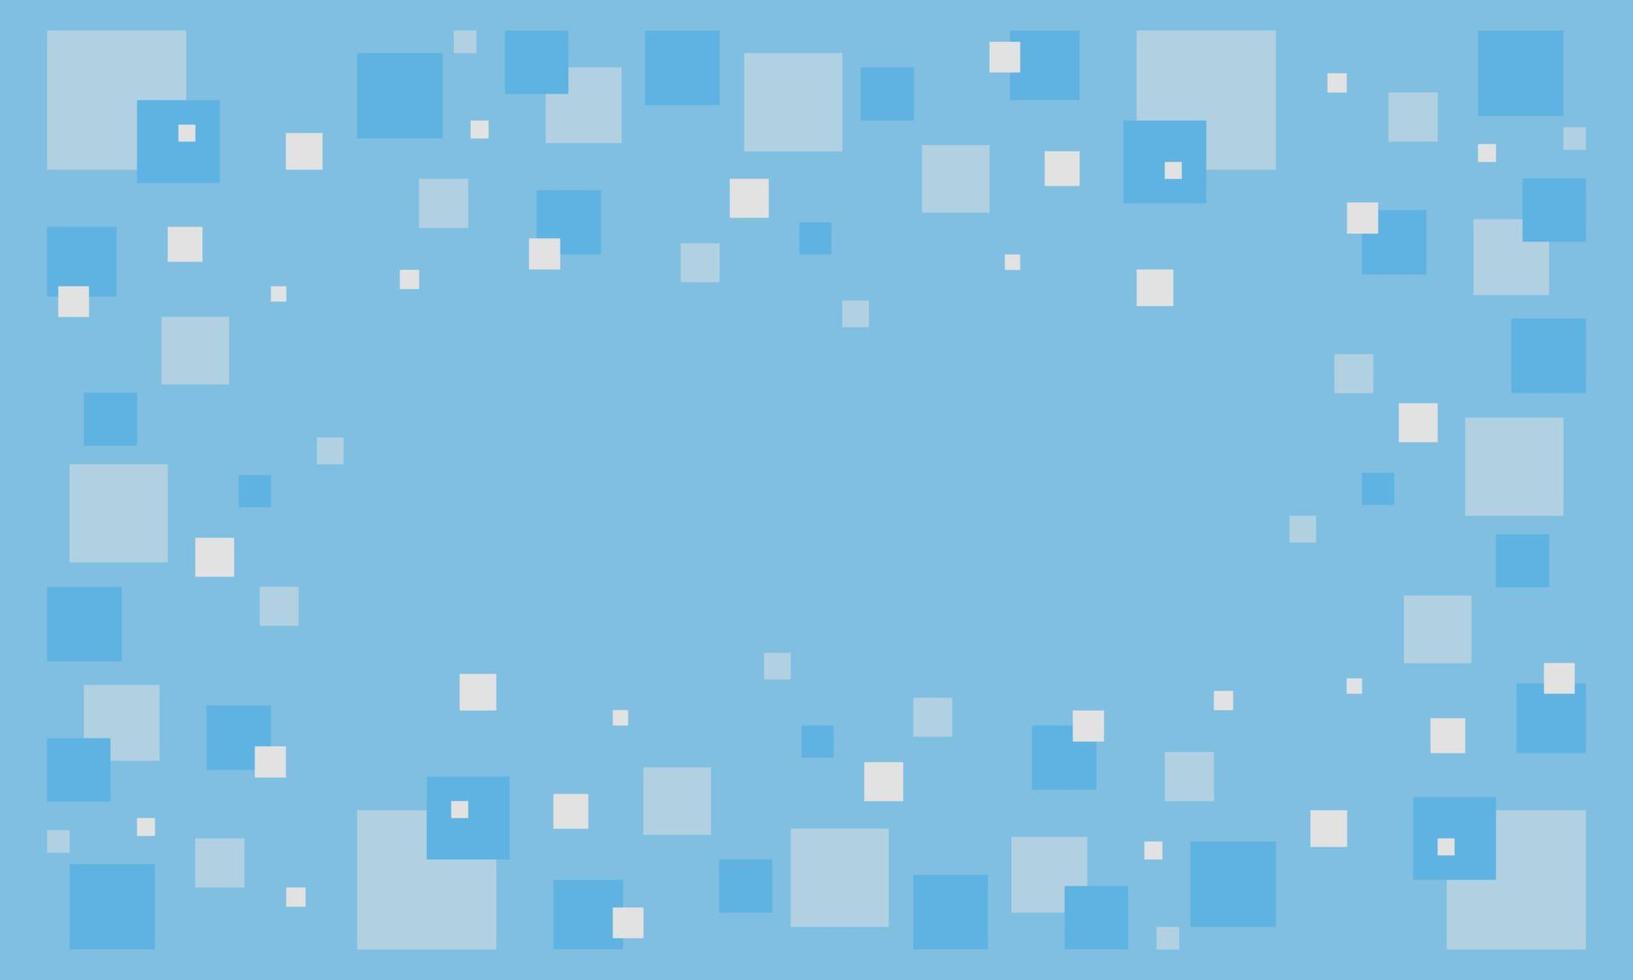 Abstract winter background with squares around the perimeter. vector illustration